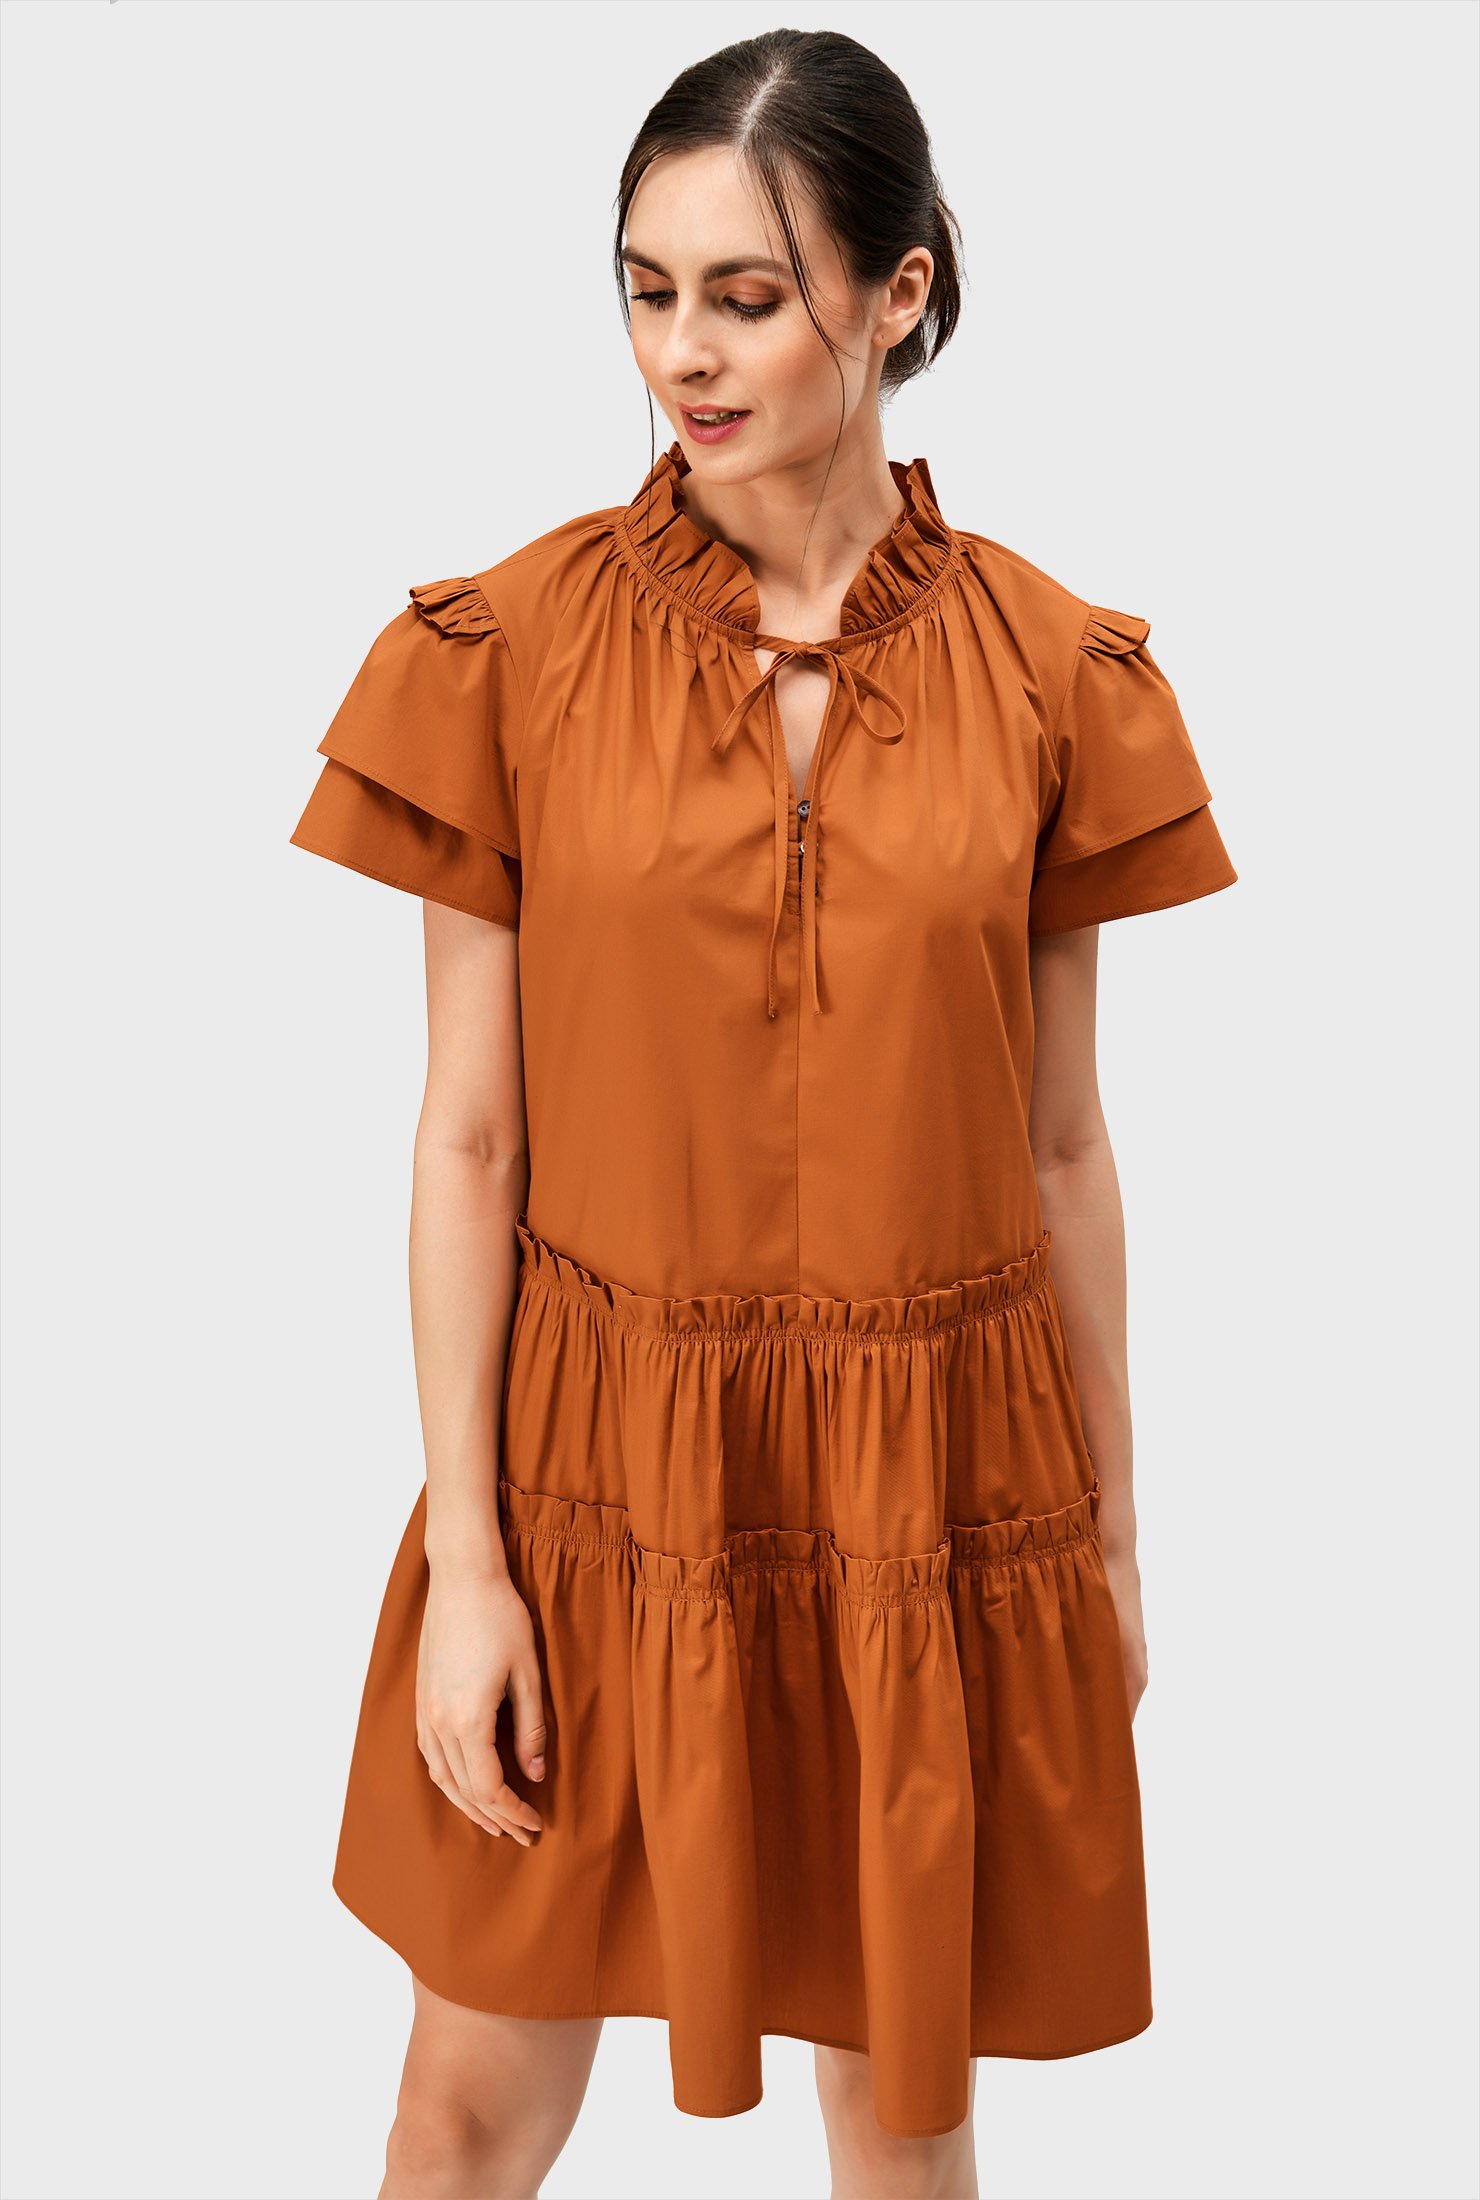 Our crisp cotton poplin dress offers pretty ruffle frills and a tiered skirt for a look that's well-matched to summery fun.